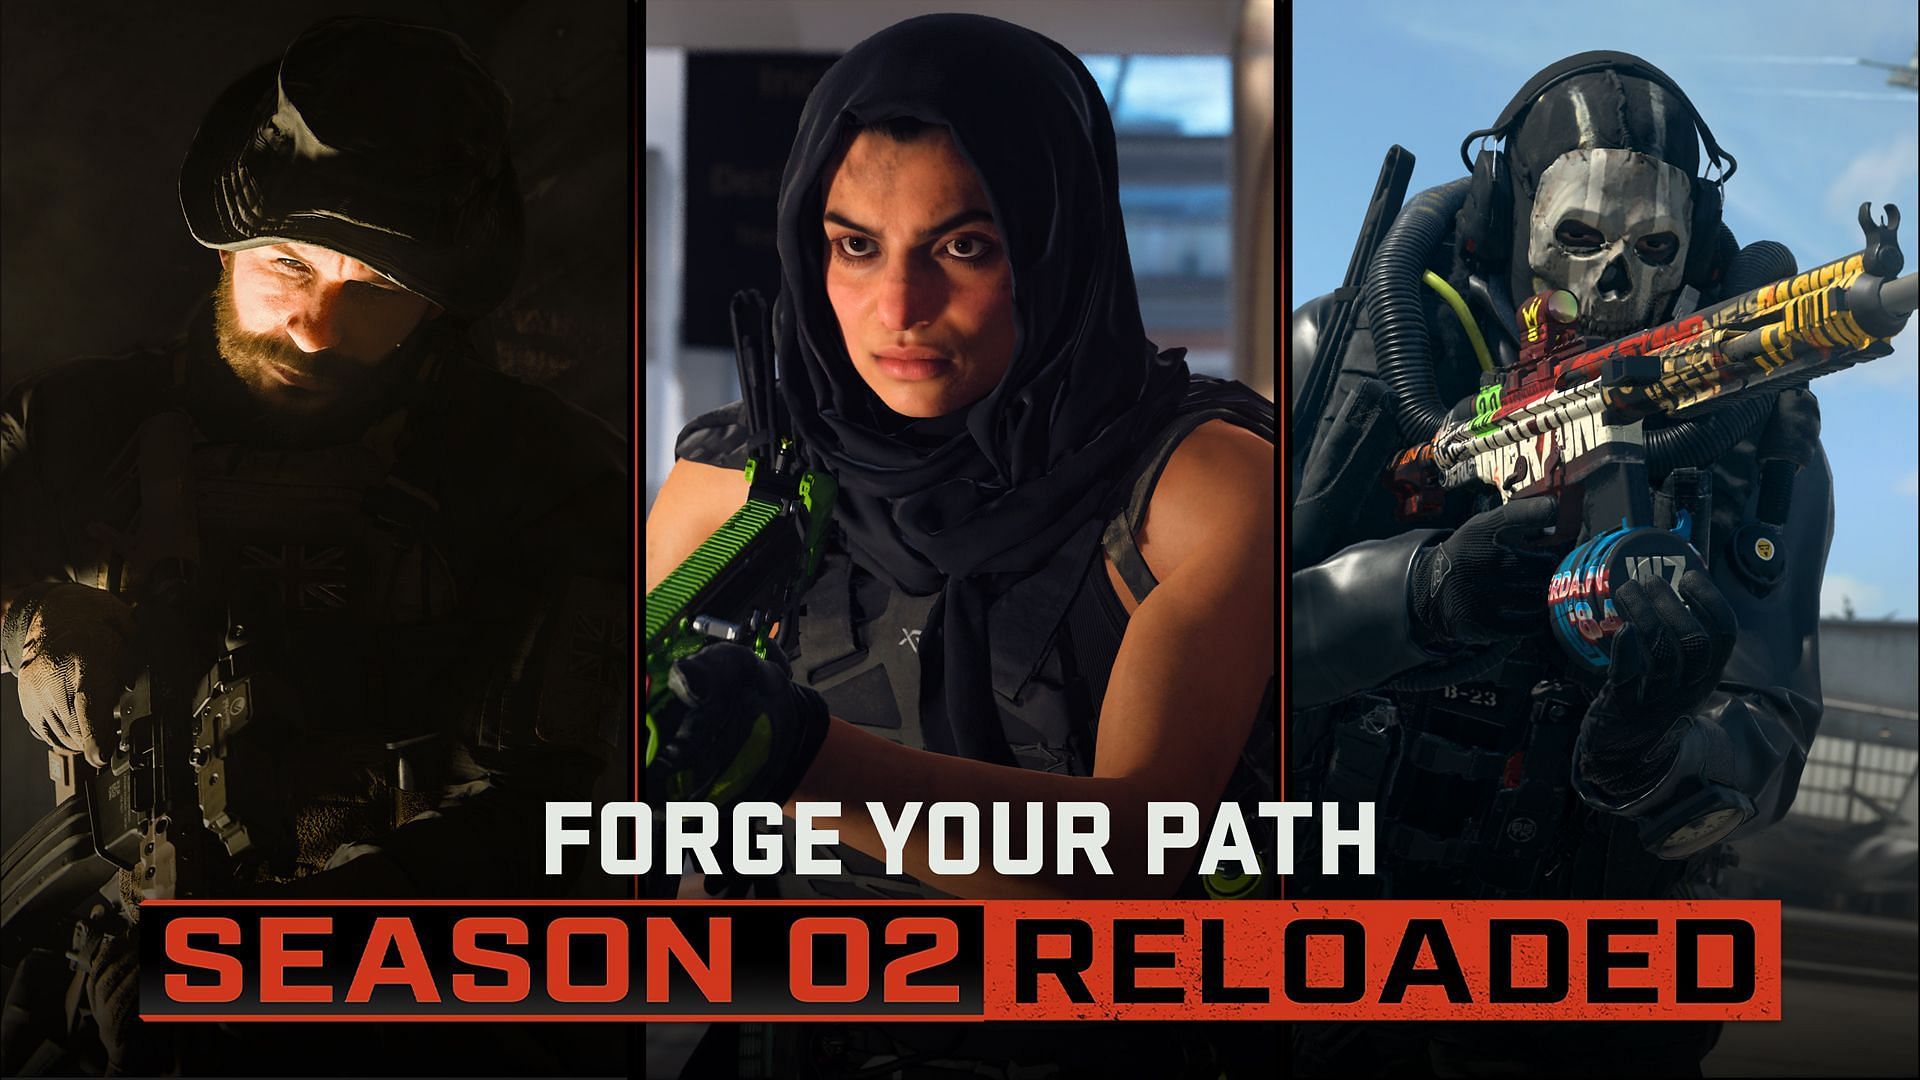 Warzone 2 Season 2 reloaded is live right now (Image via Activision)